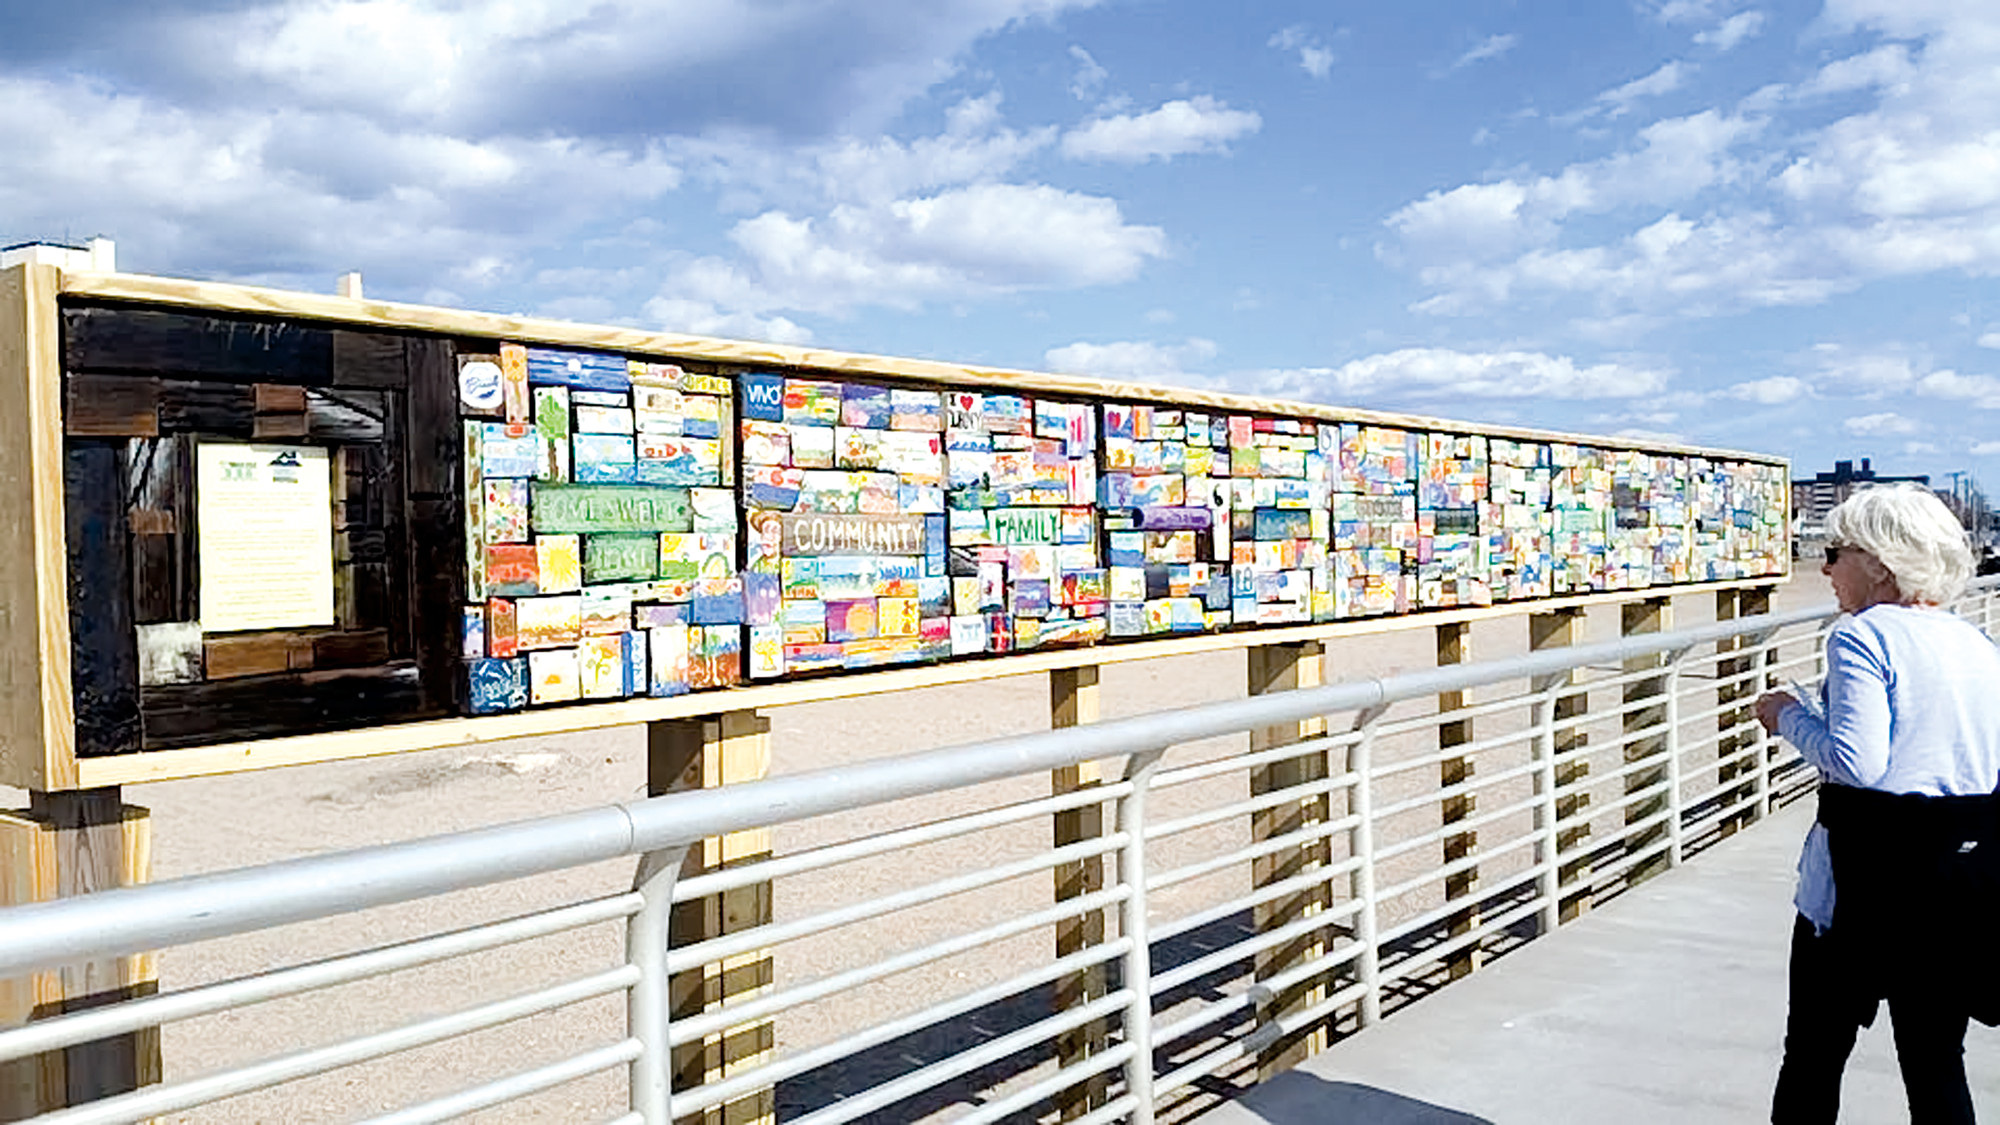 Courtesy West End Arts/Facebook The newly finished installation is composed of 14 square panels made of repurposed wood from the original boardwalk and painted by residents.